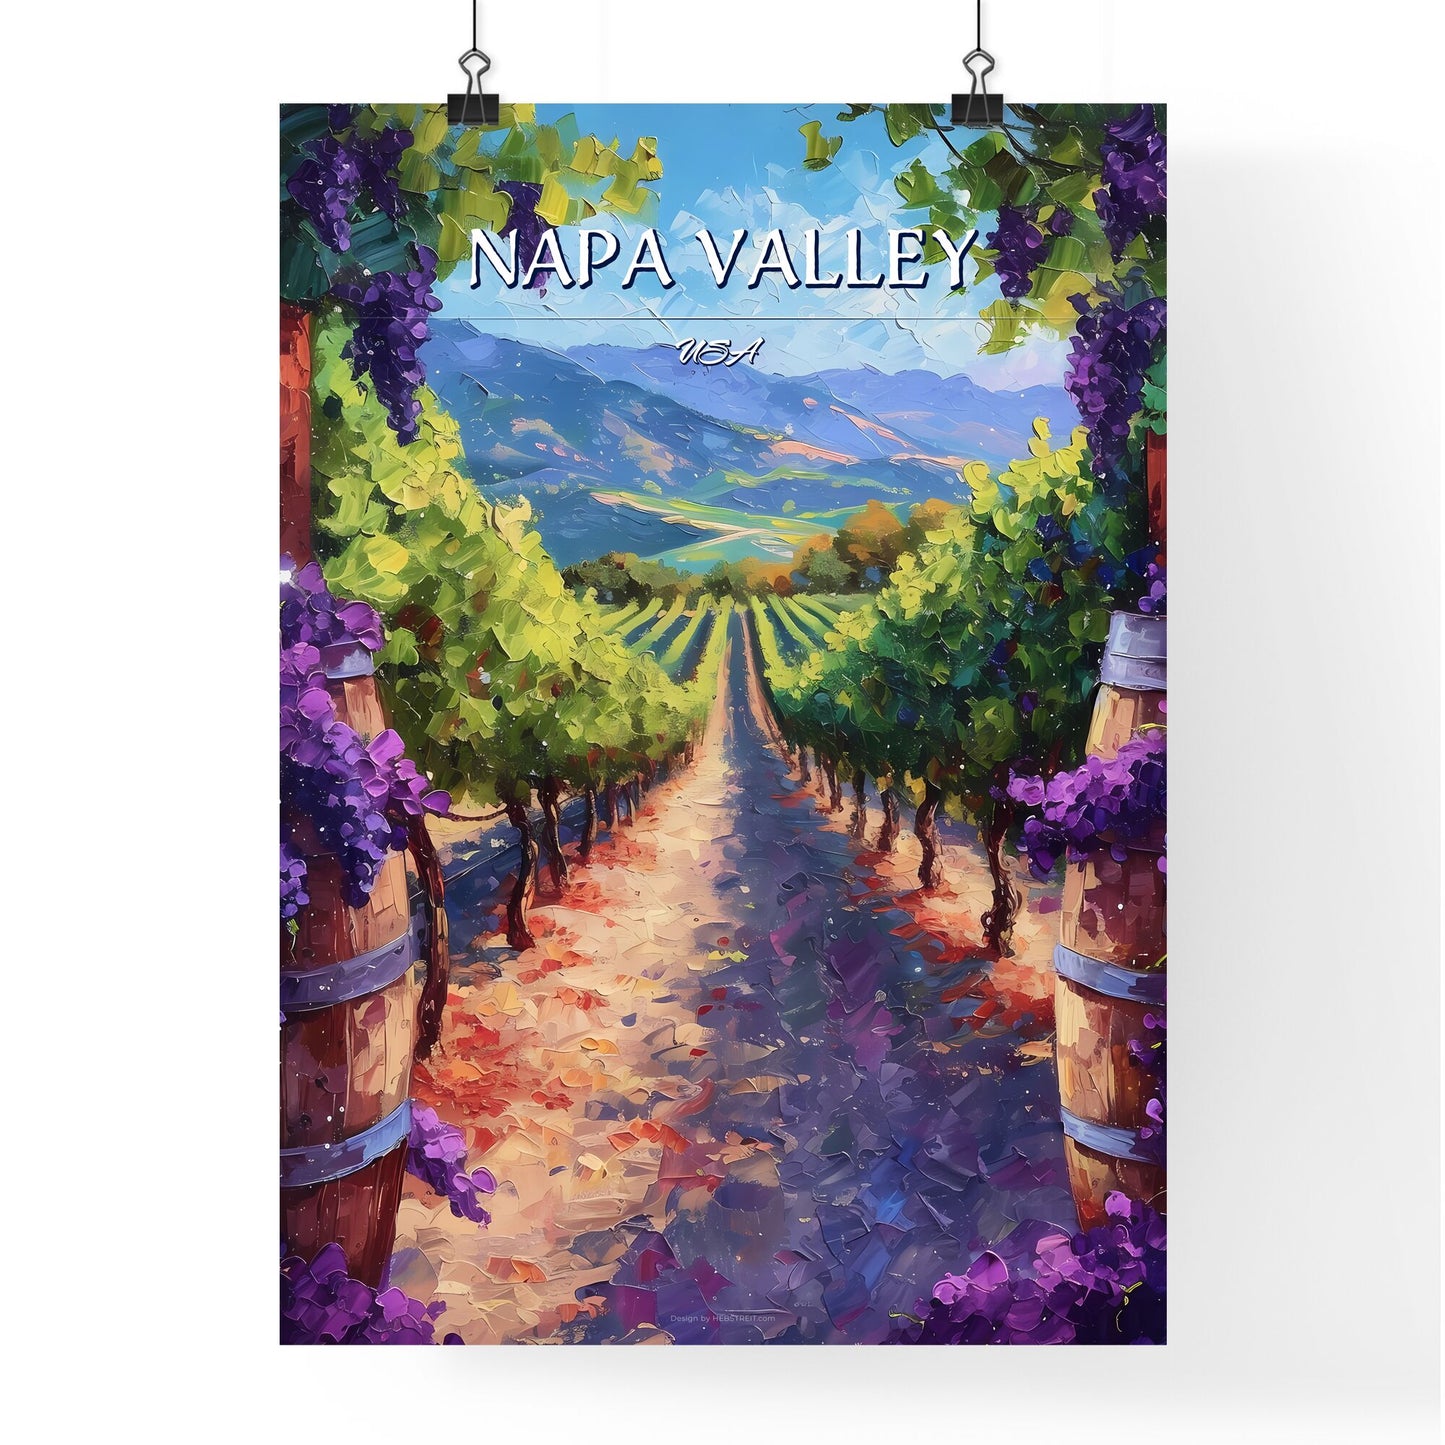 Napa Valley, USA - Art print of a painting of a vineyard Default Title